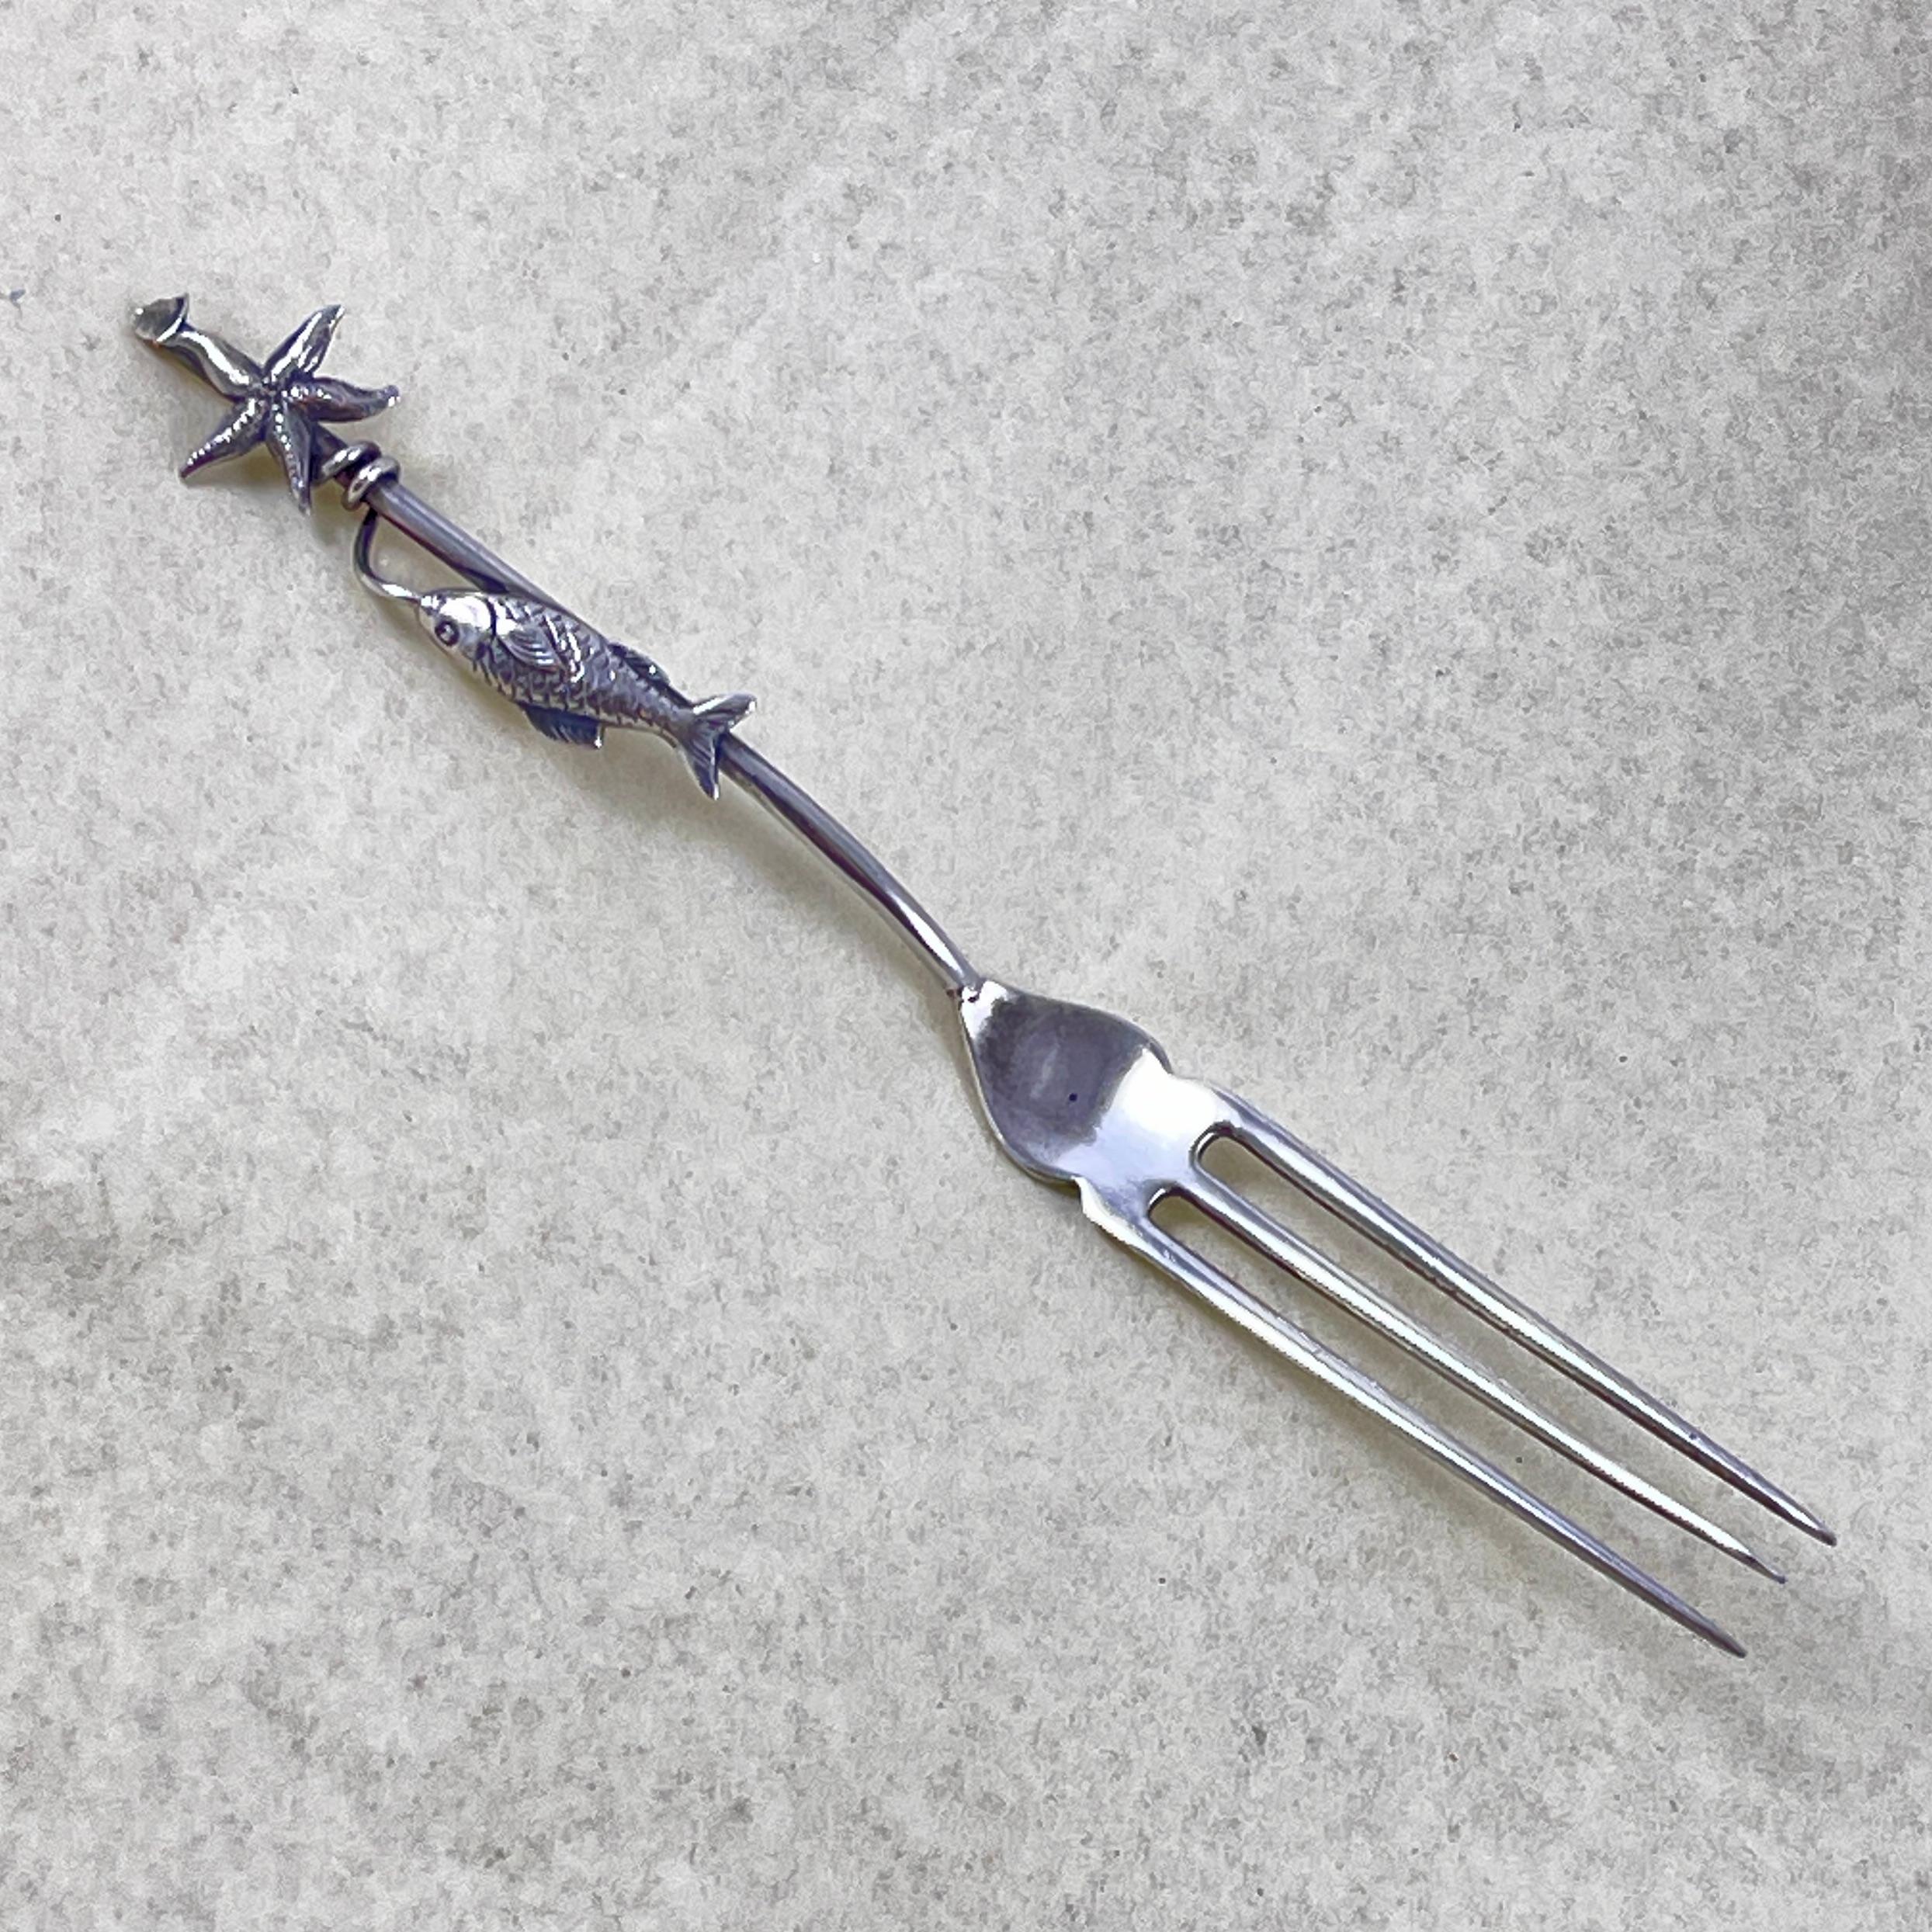 A charming one of a kind, Artisan made Sterling Silver Lemon fork with a Maritime seafood theme, circa early- mid 20th Century.

The three-tined fork features a handle modeled as a fishing pole, terminating with an applied Starfish. A fishing line